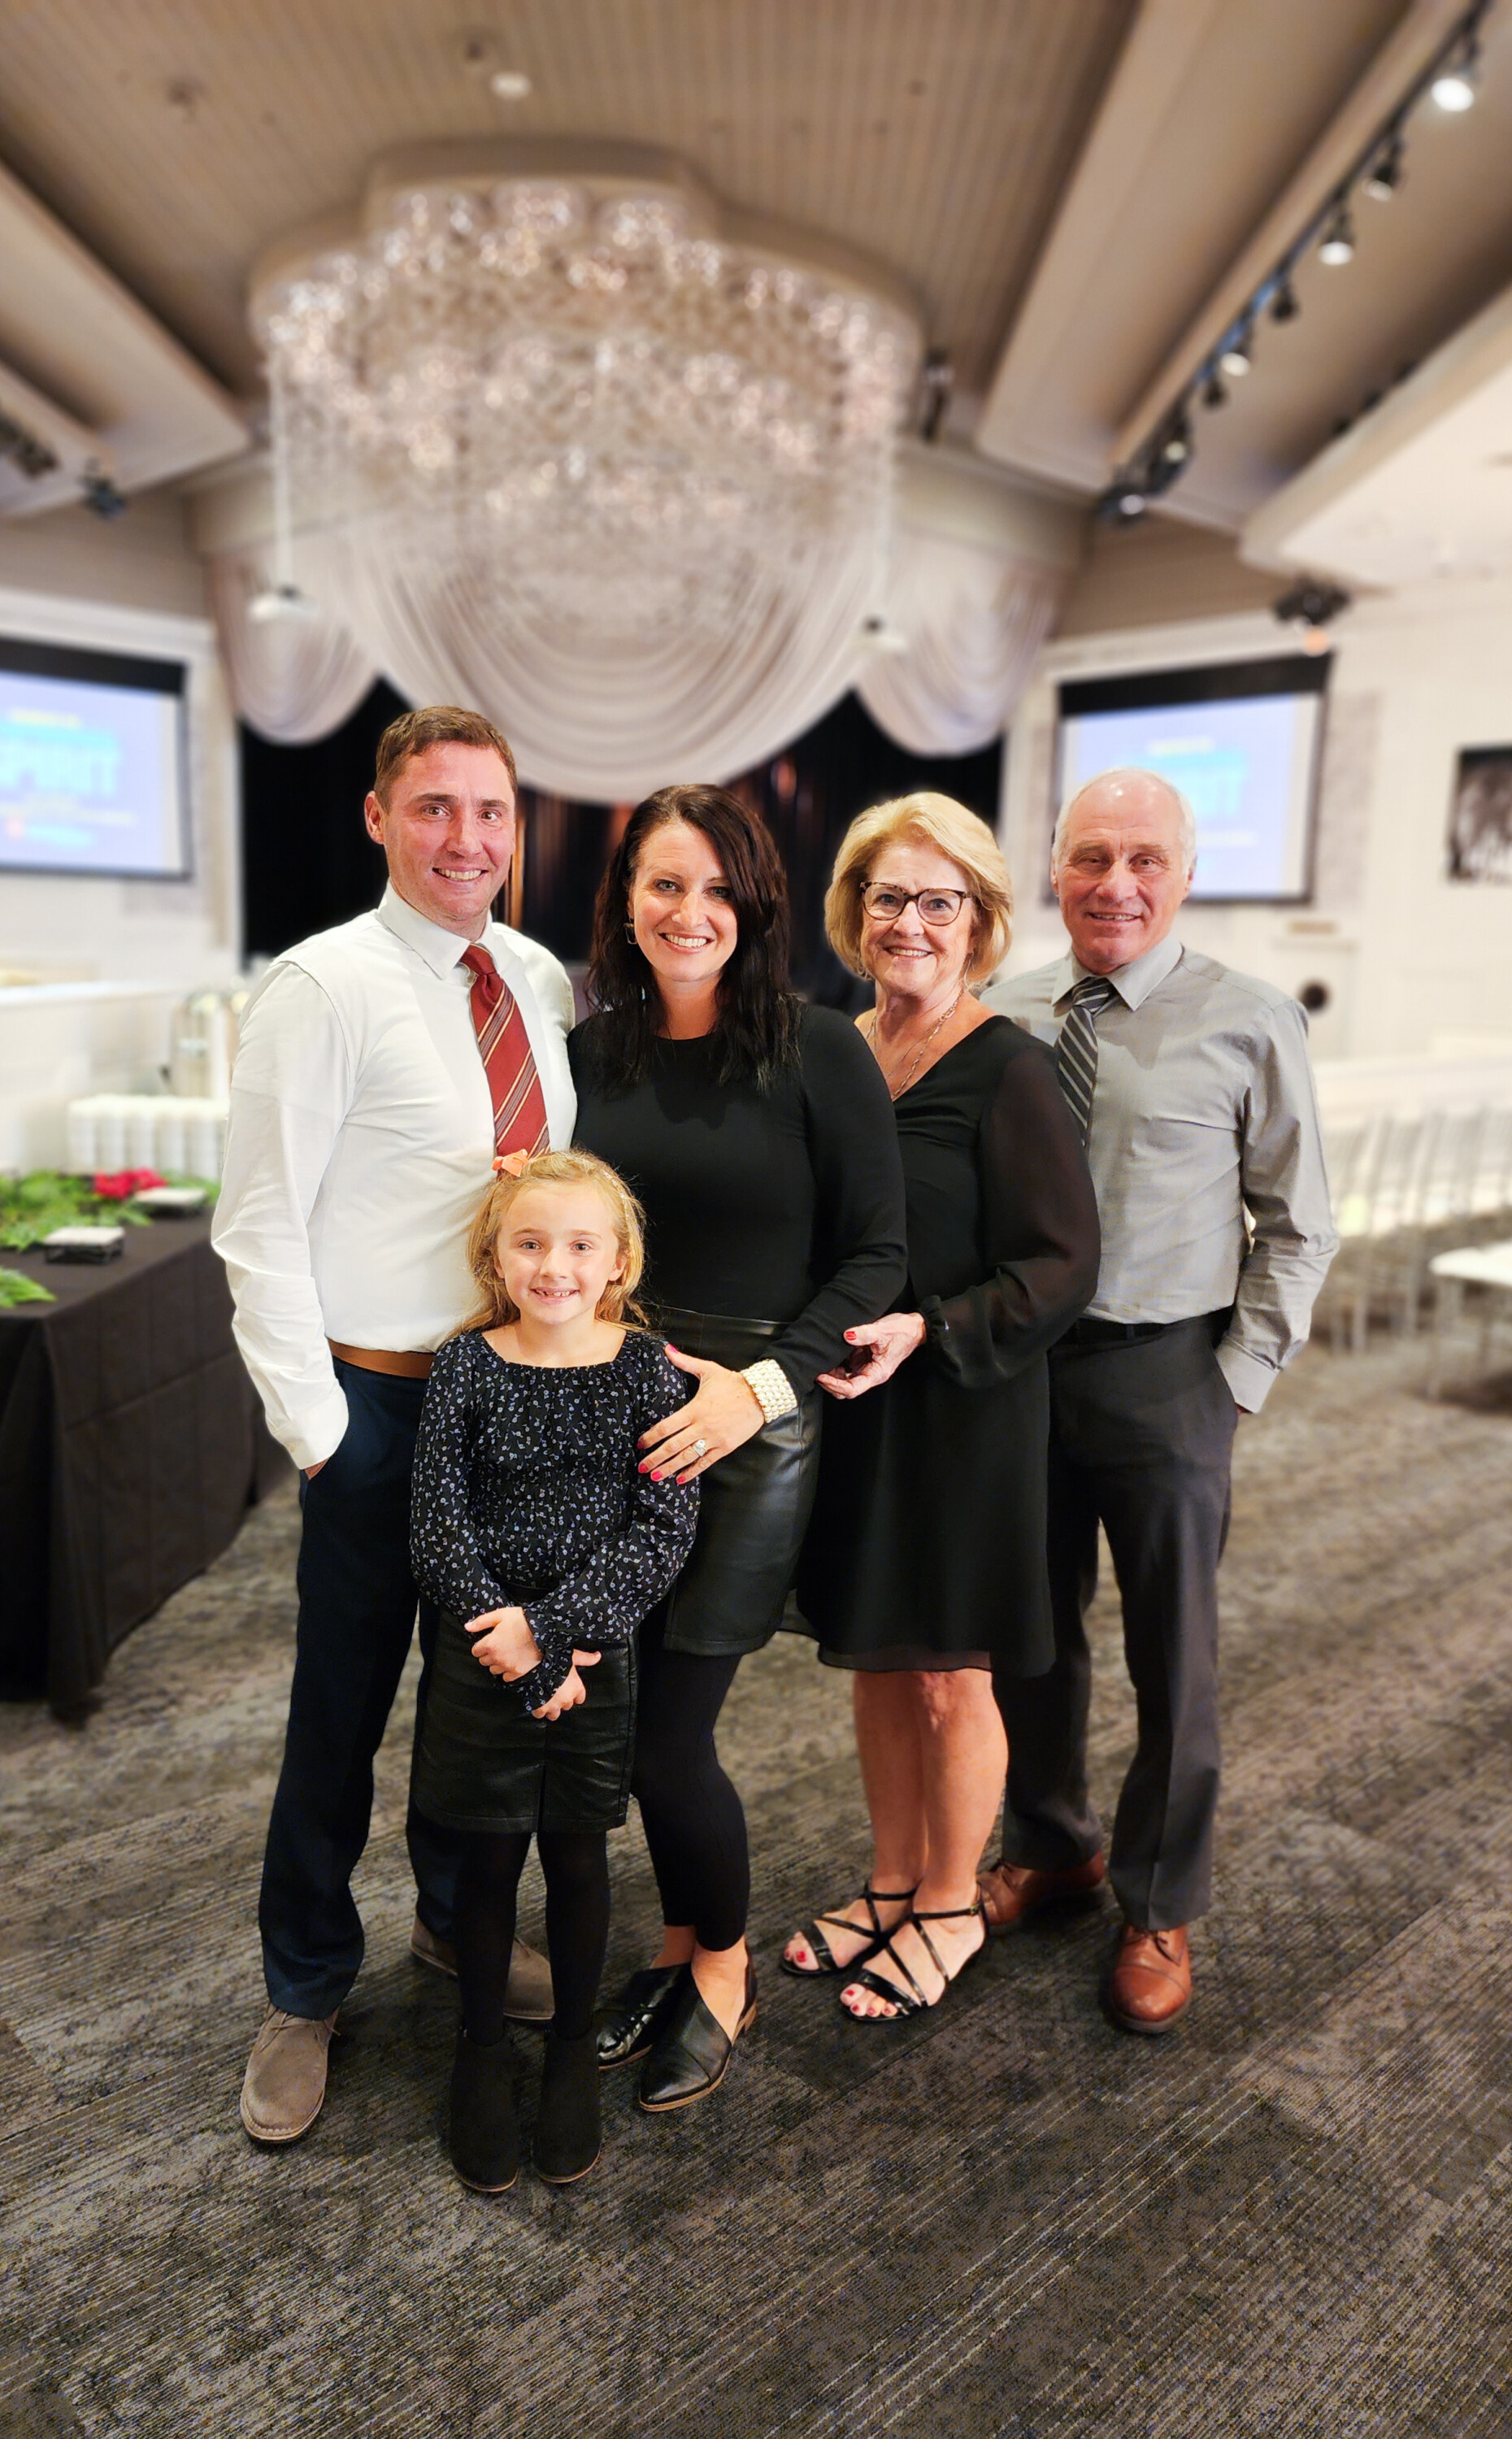 Shannon M. Wiger with Husband Nick Wiger, daughter Anne Wiger and parents Ed and Rita Verly